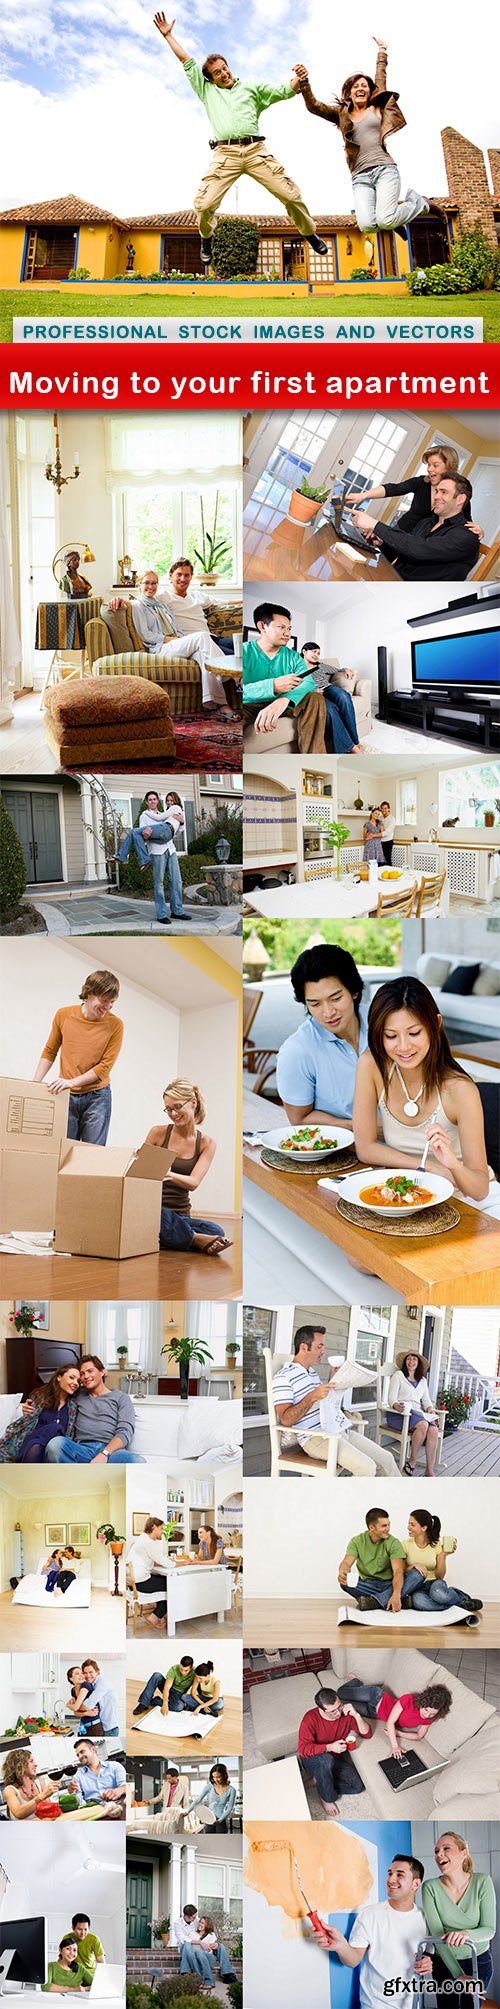 Moving to your first apartment - 21 UHQ JPEG